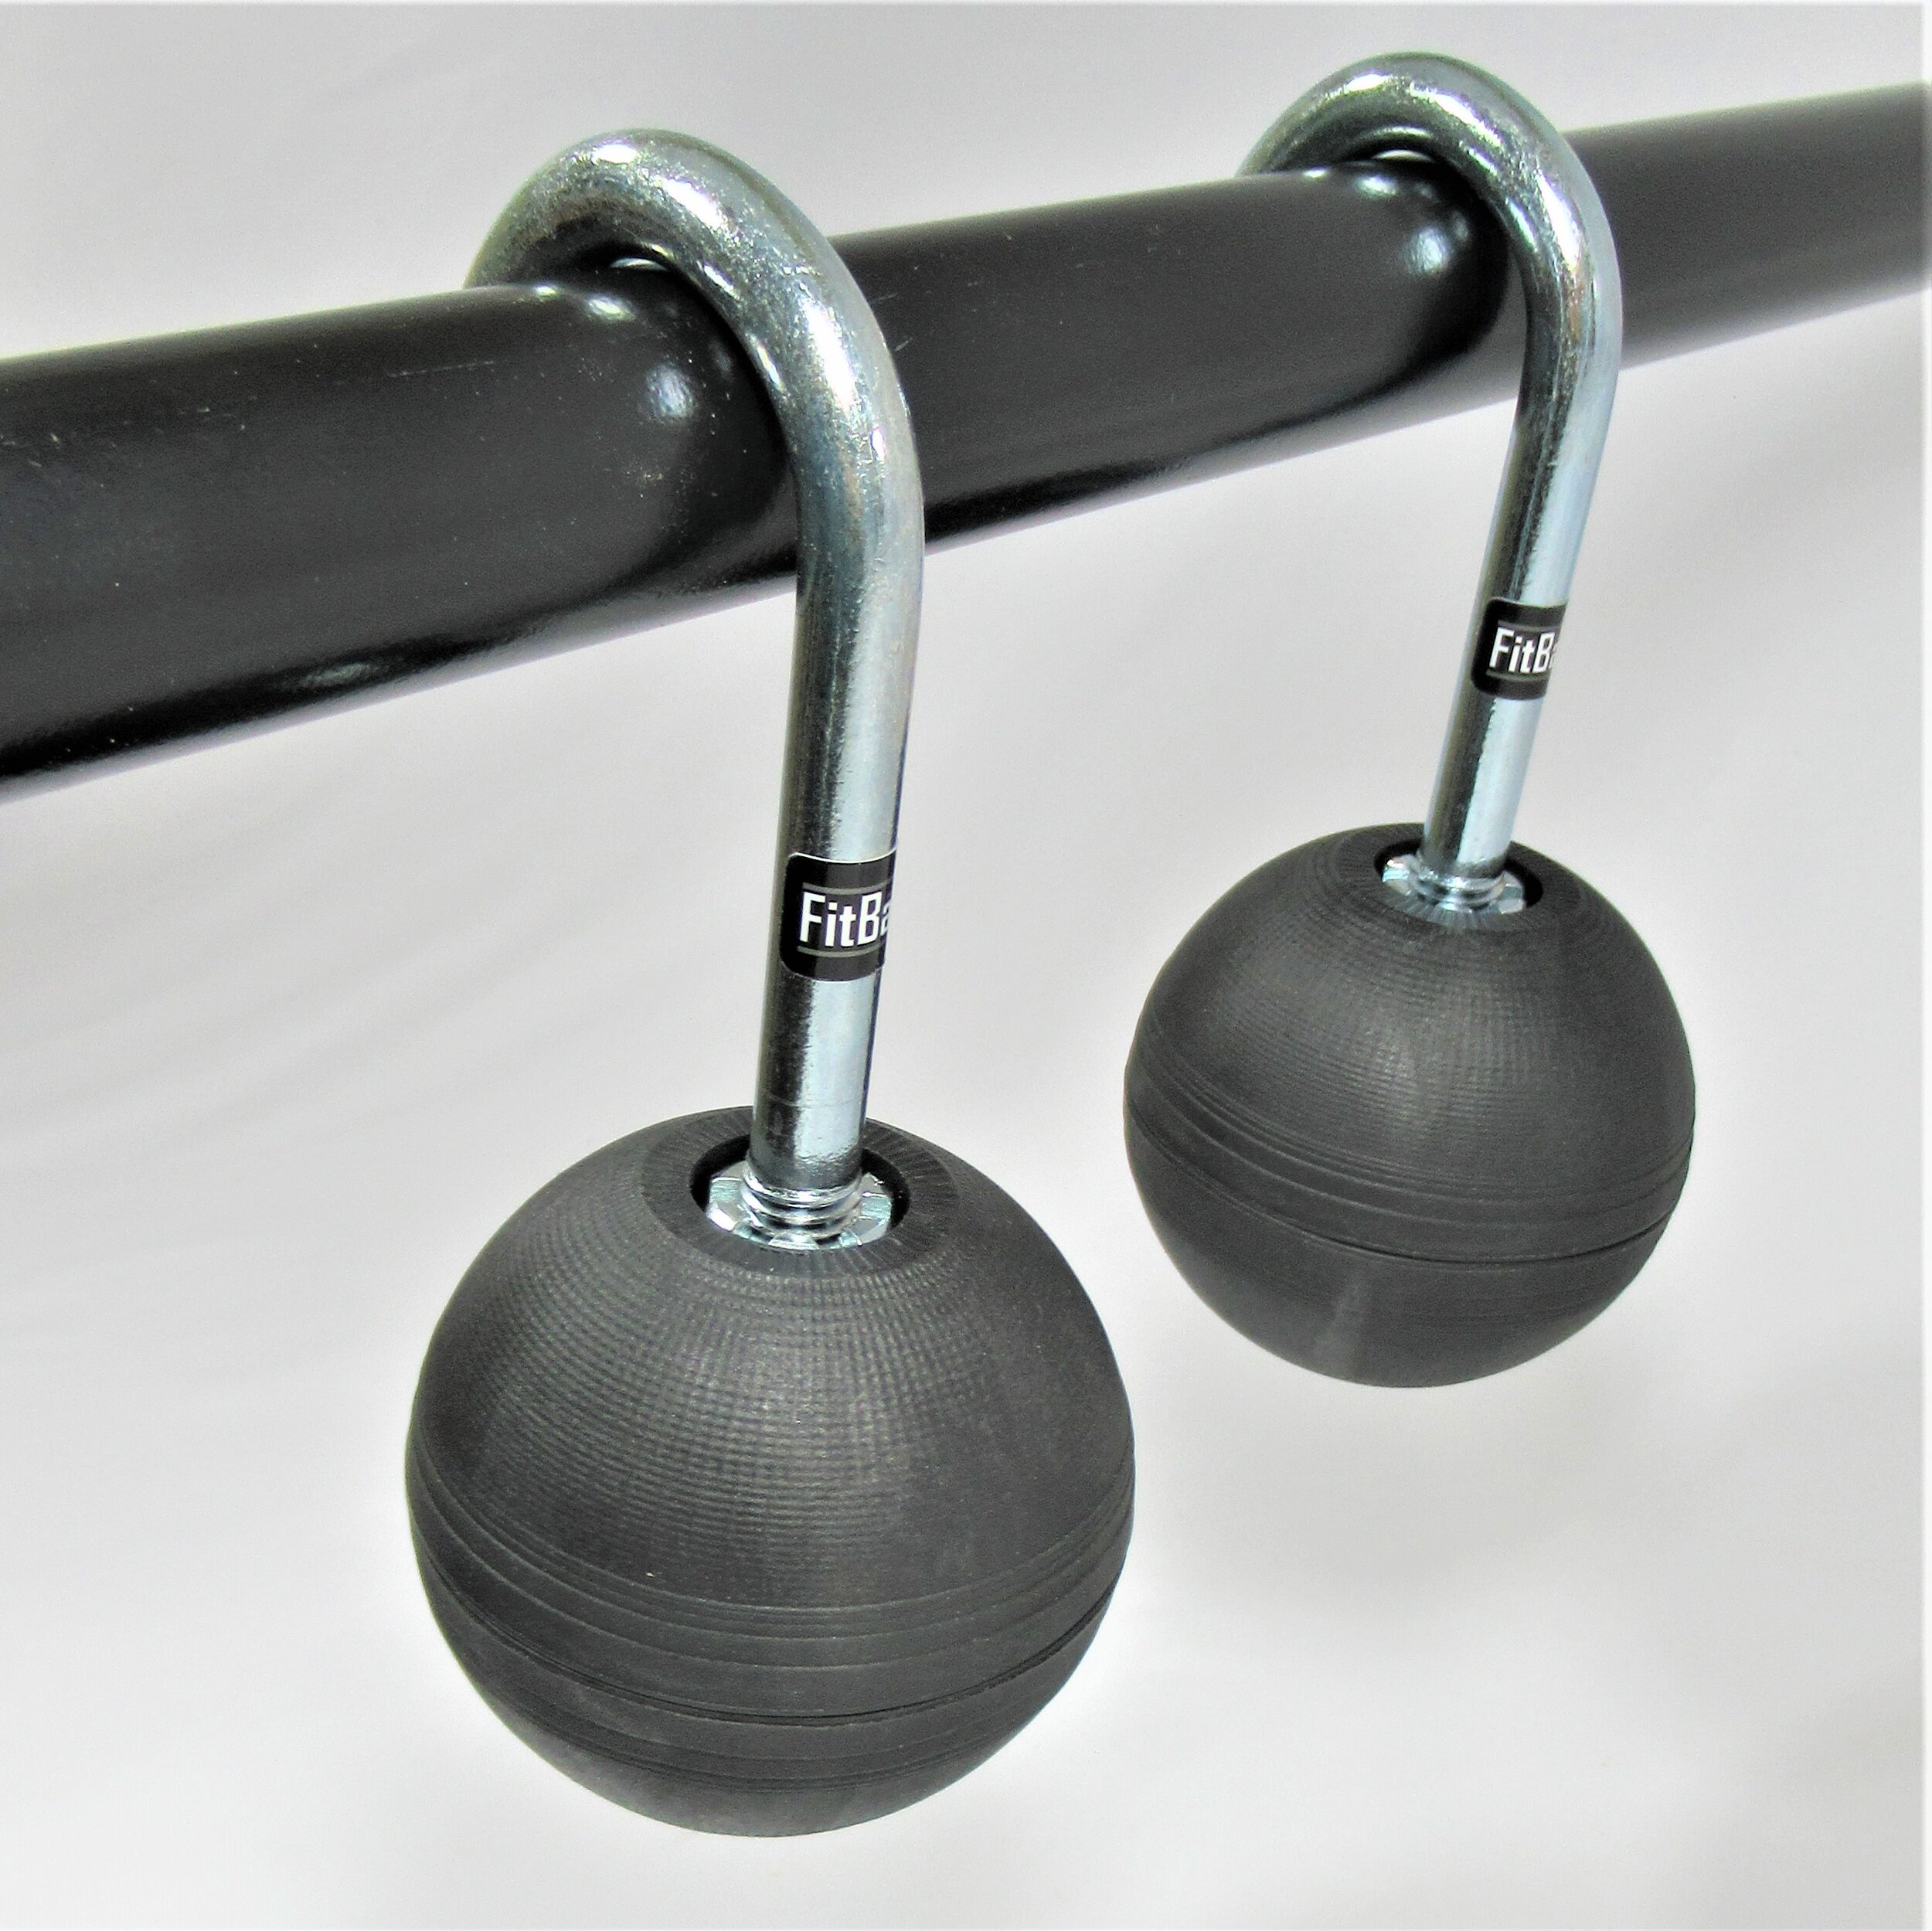 Extra Wide Pull up Bar - FitBar Grip, Obstacle, Strength Equipment